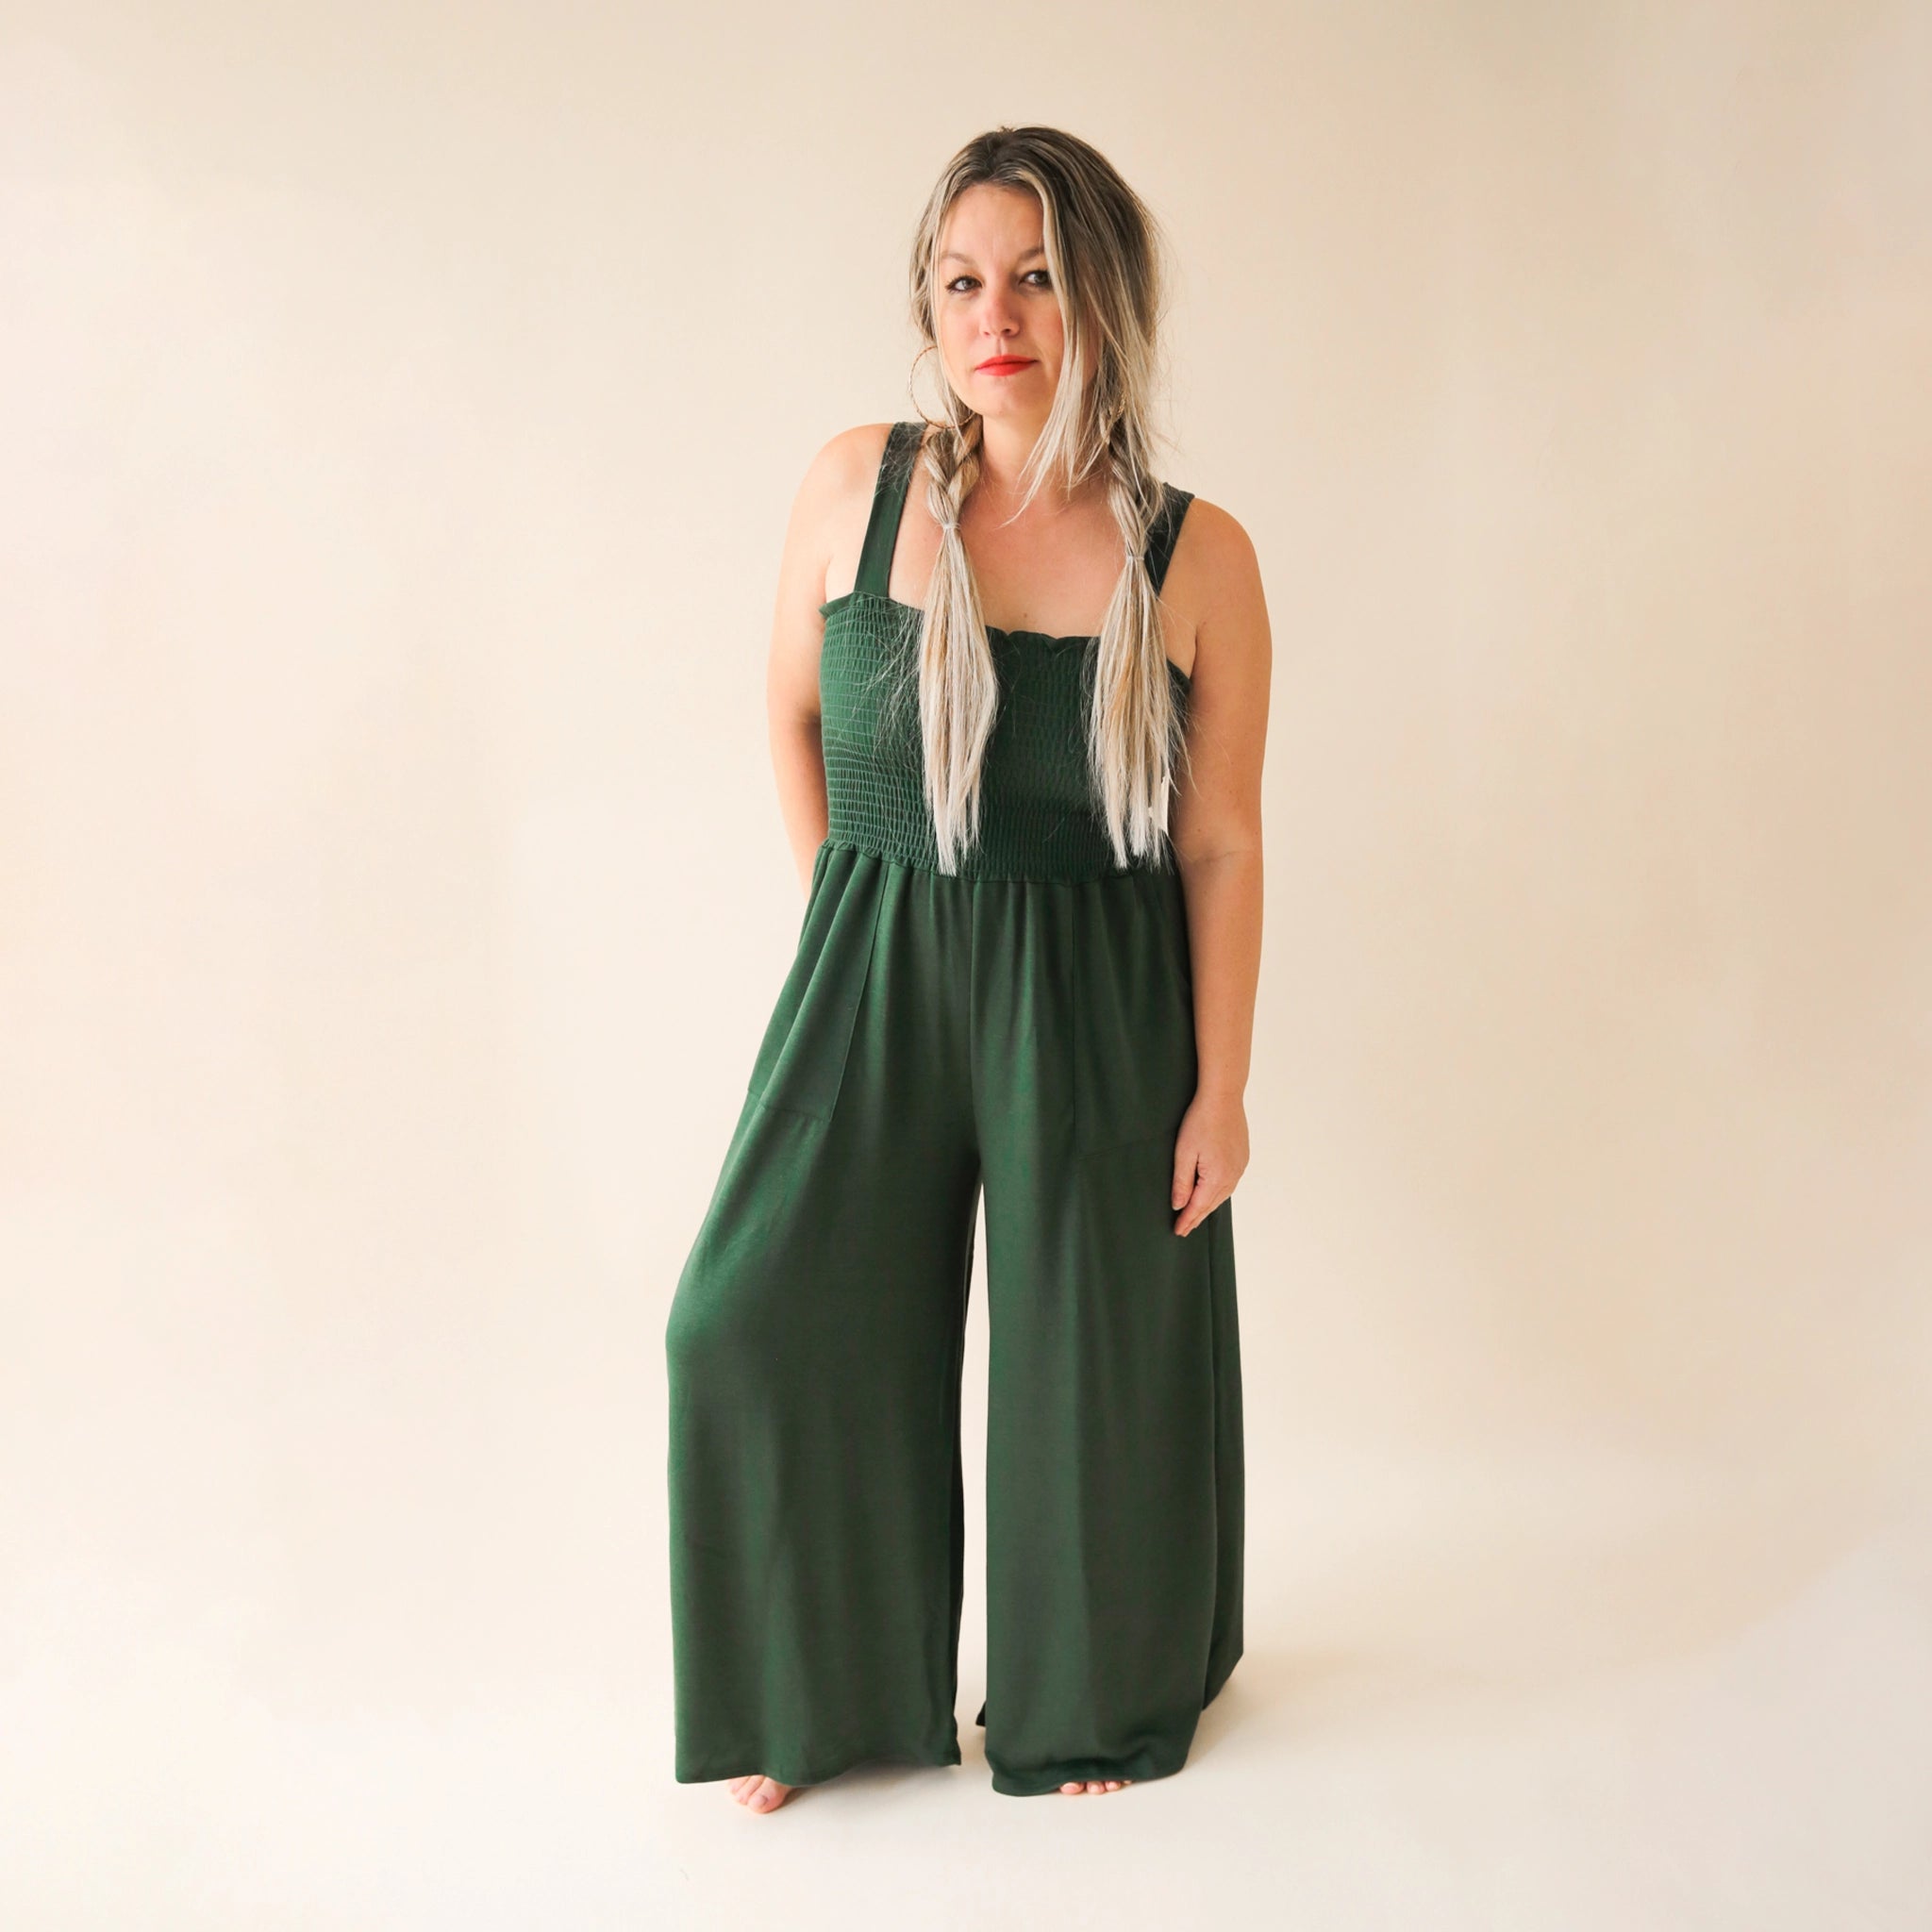 On a cream background is a model wearing a hunter green wide leg jumpsuit with large pockets and 1.5" shoulder straps.